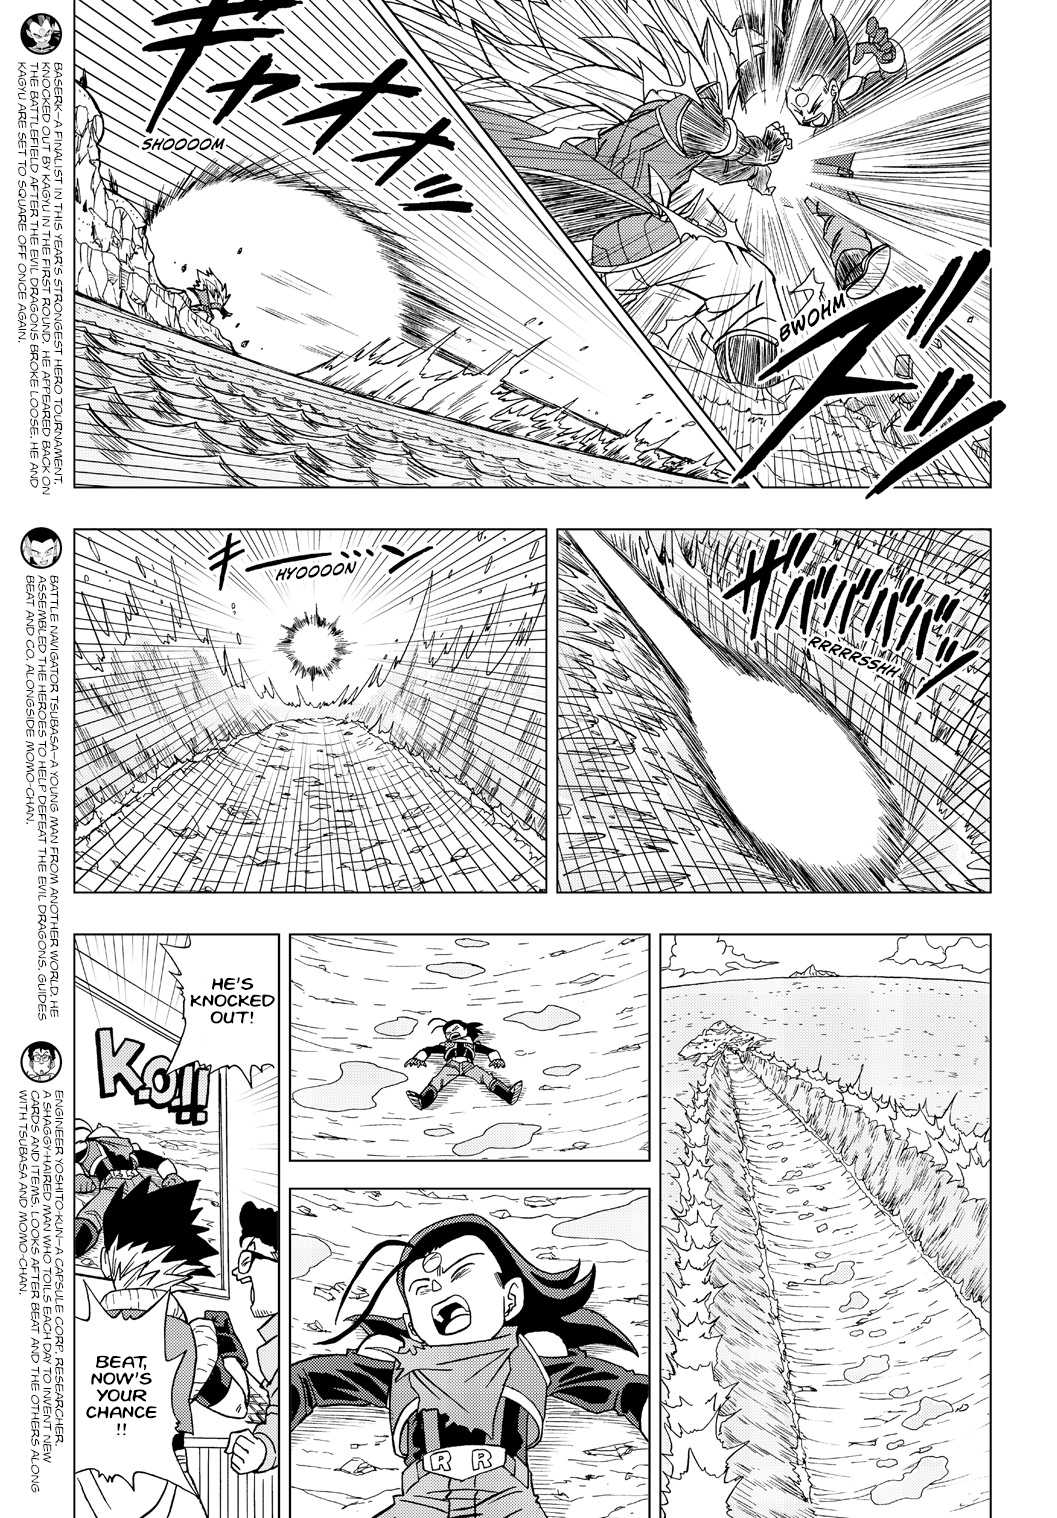 Dragon Ball Heroes - Victory Mission - Page 3